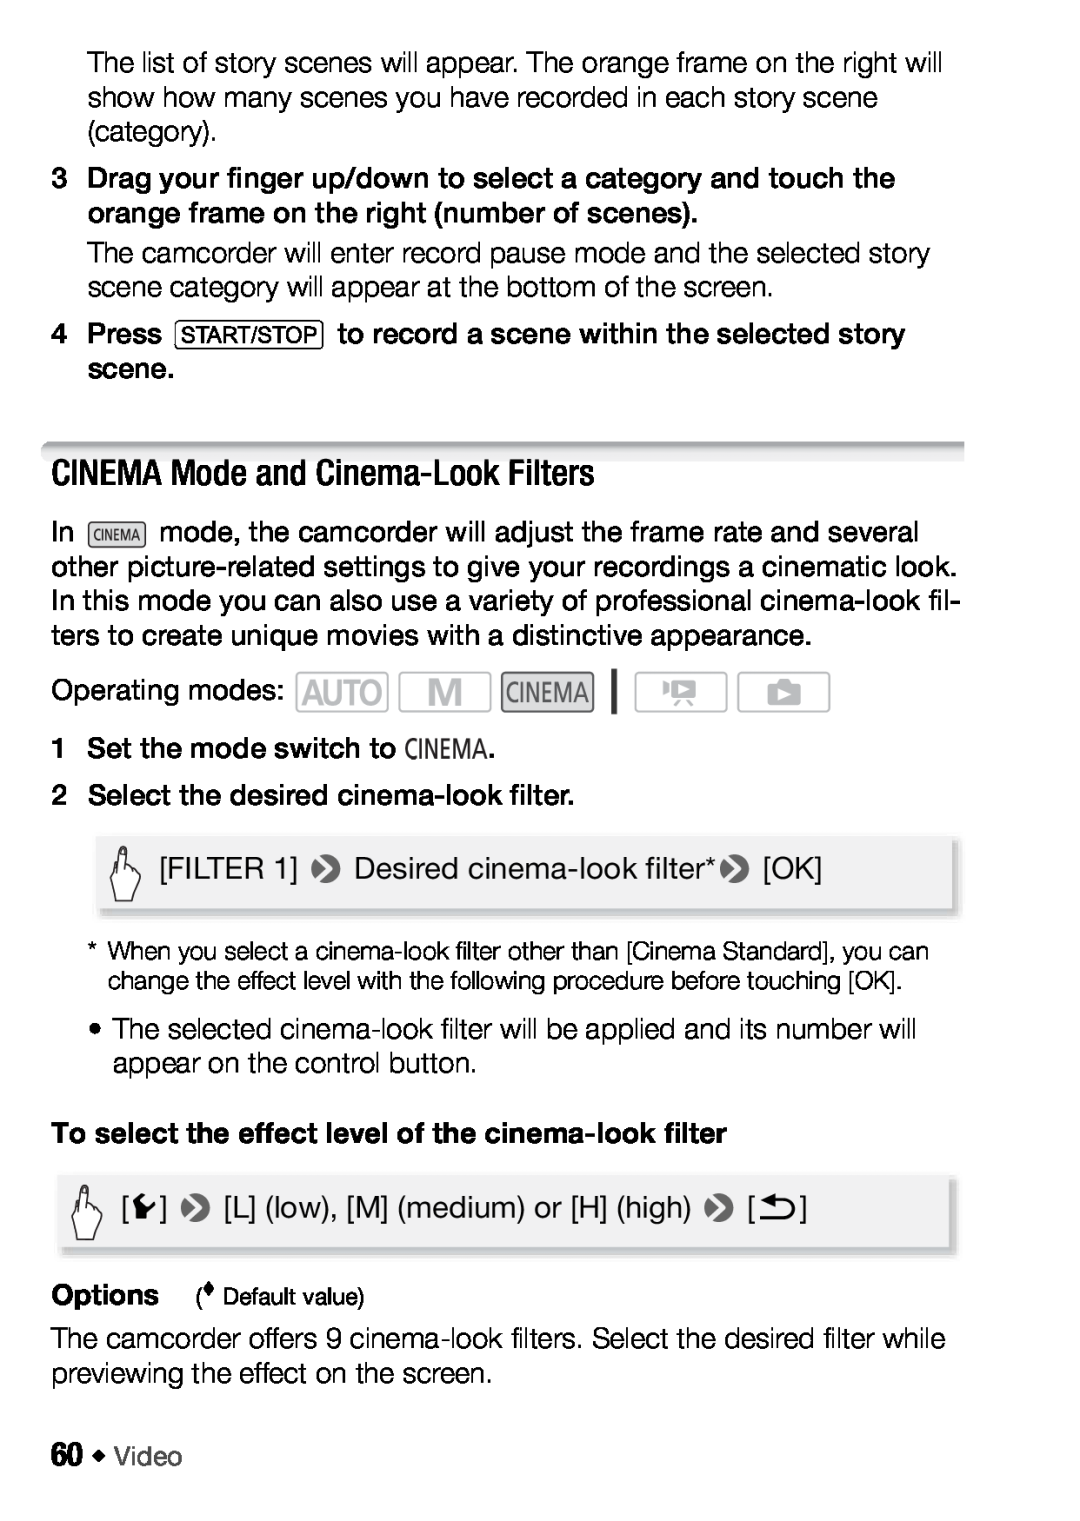 Canon HFM406, HFM46 CINEMA Mode and Cinema-Look Filters, To select the effect level of the cinema-look filter 